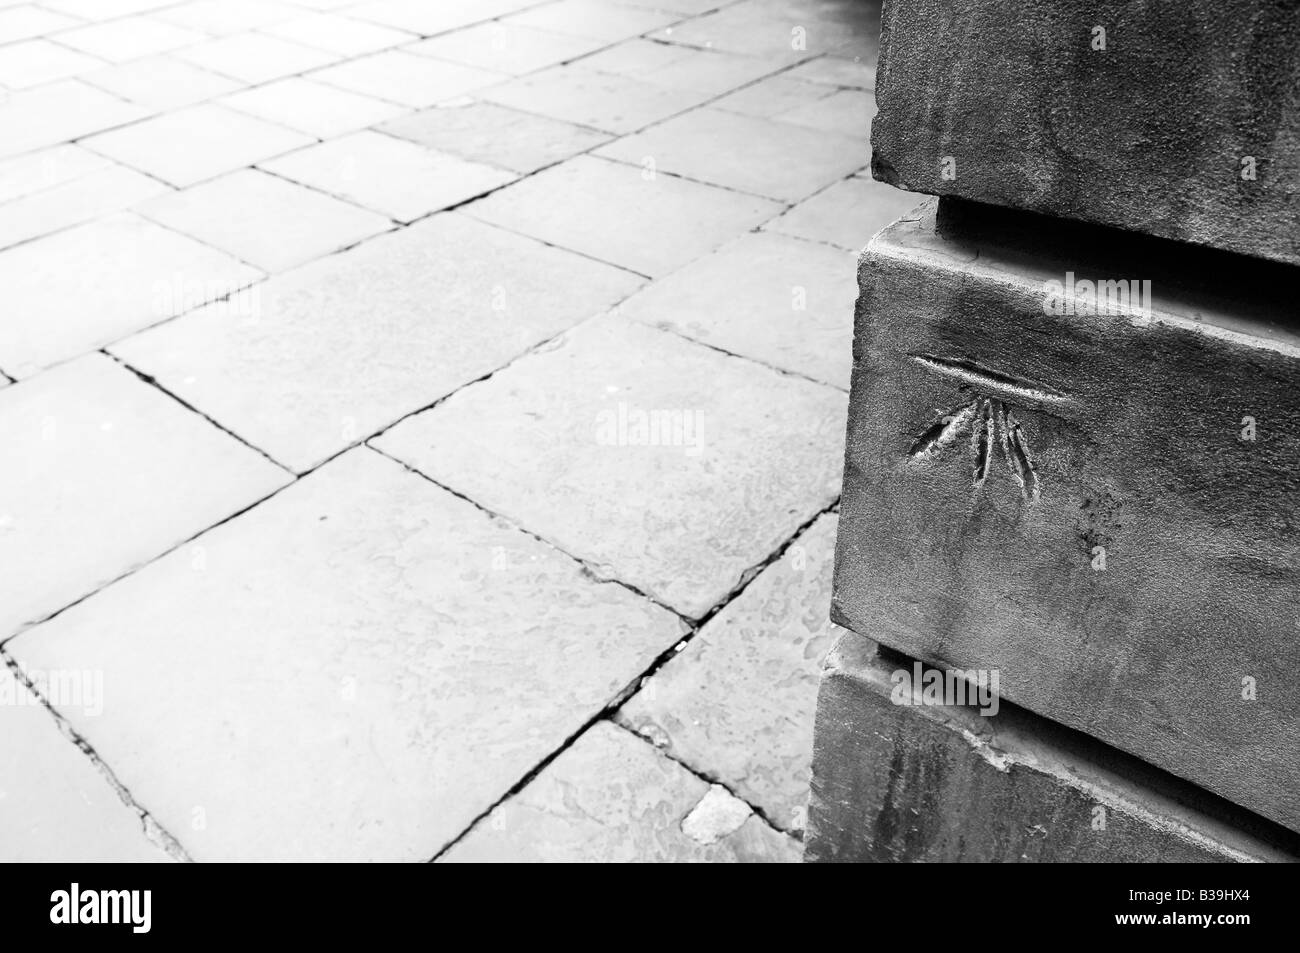 cartographers mark sign symbol saint anns church manchester england uk city centre exact paving stone flags pavement old Stock Photo